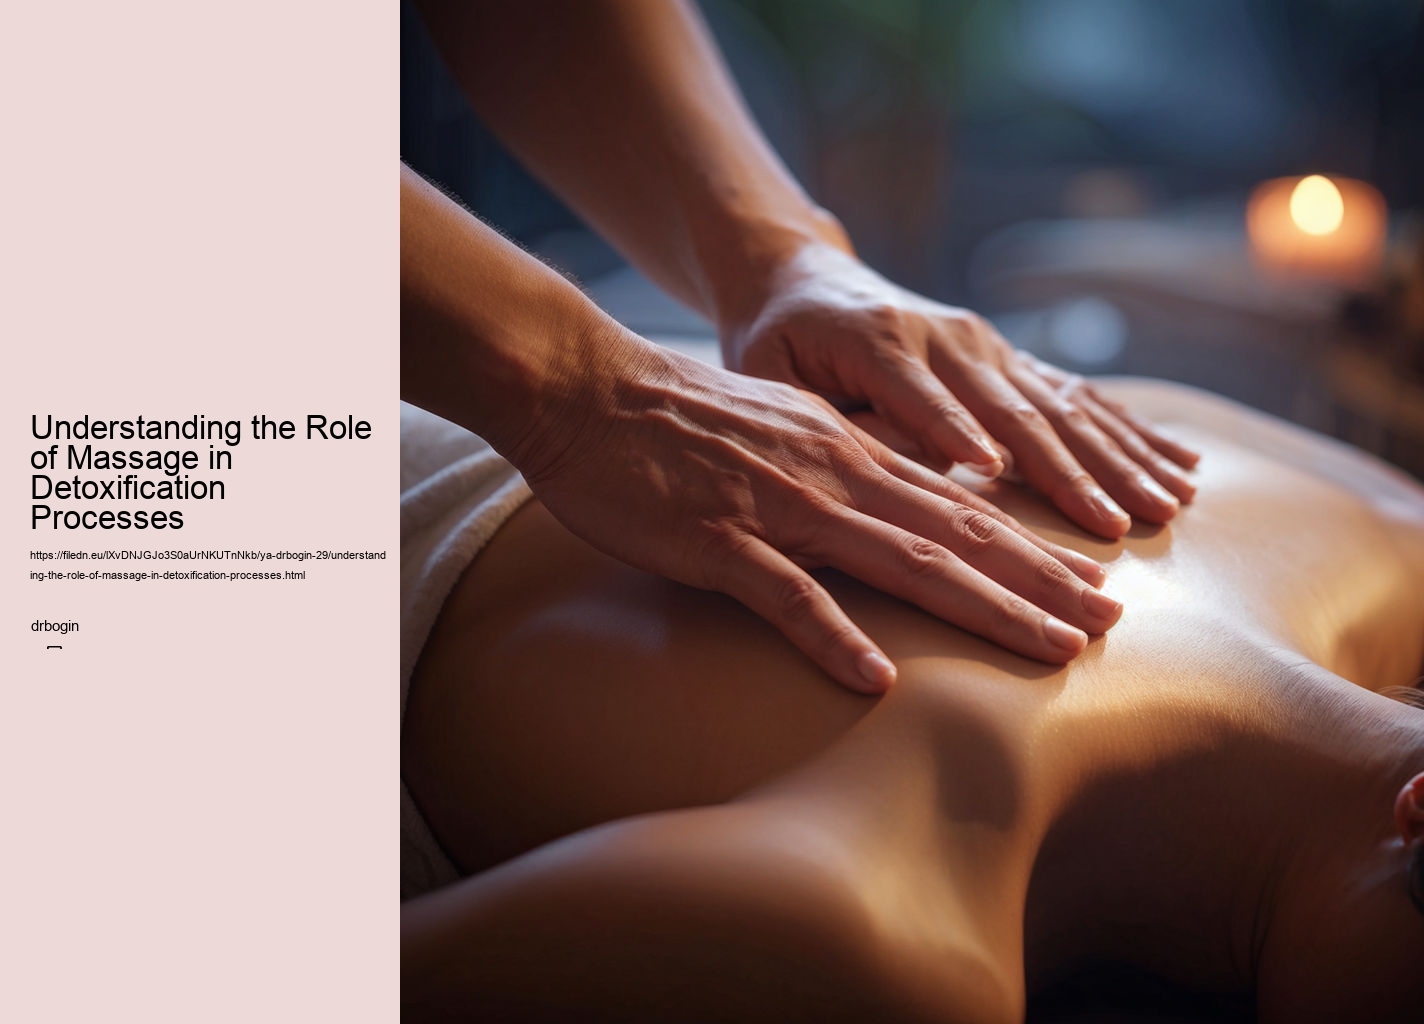 Understanding the Role of Massage in Detoxification Processes